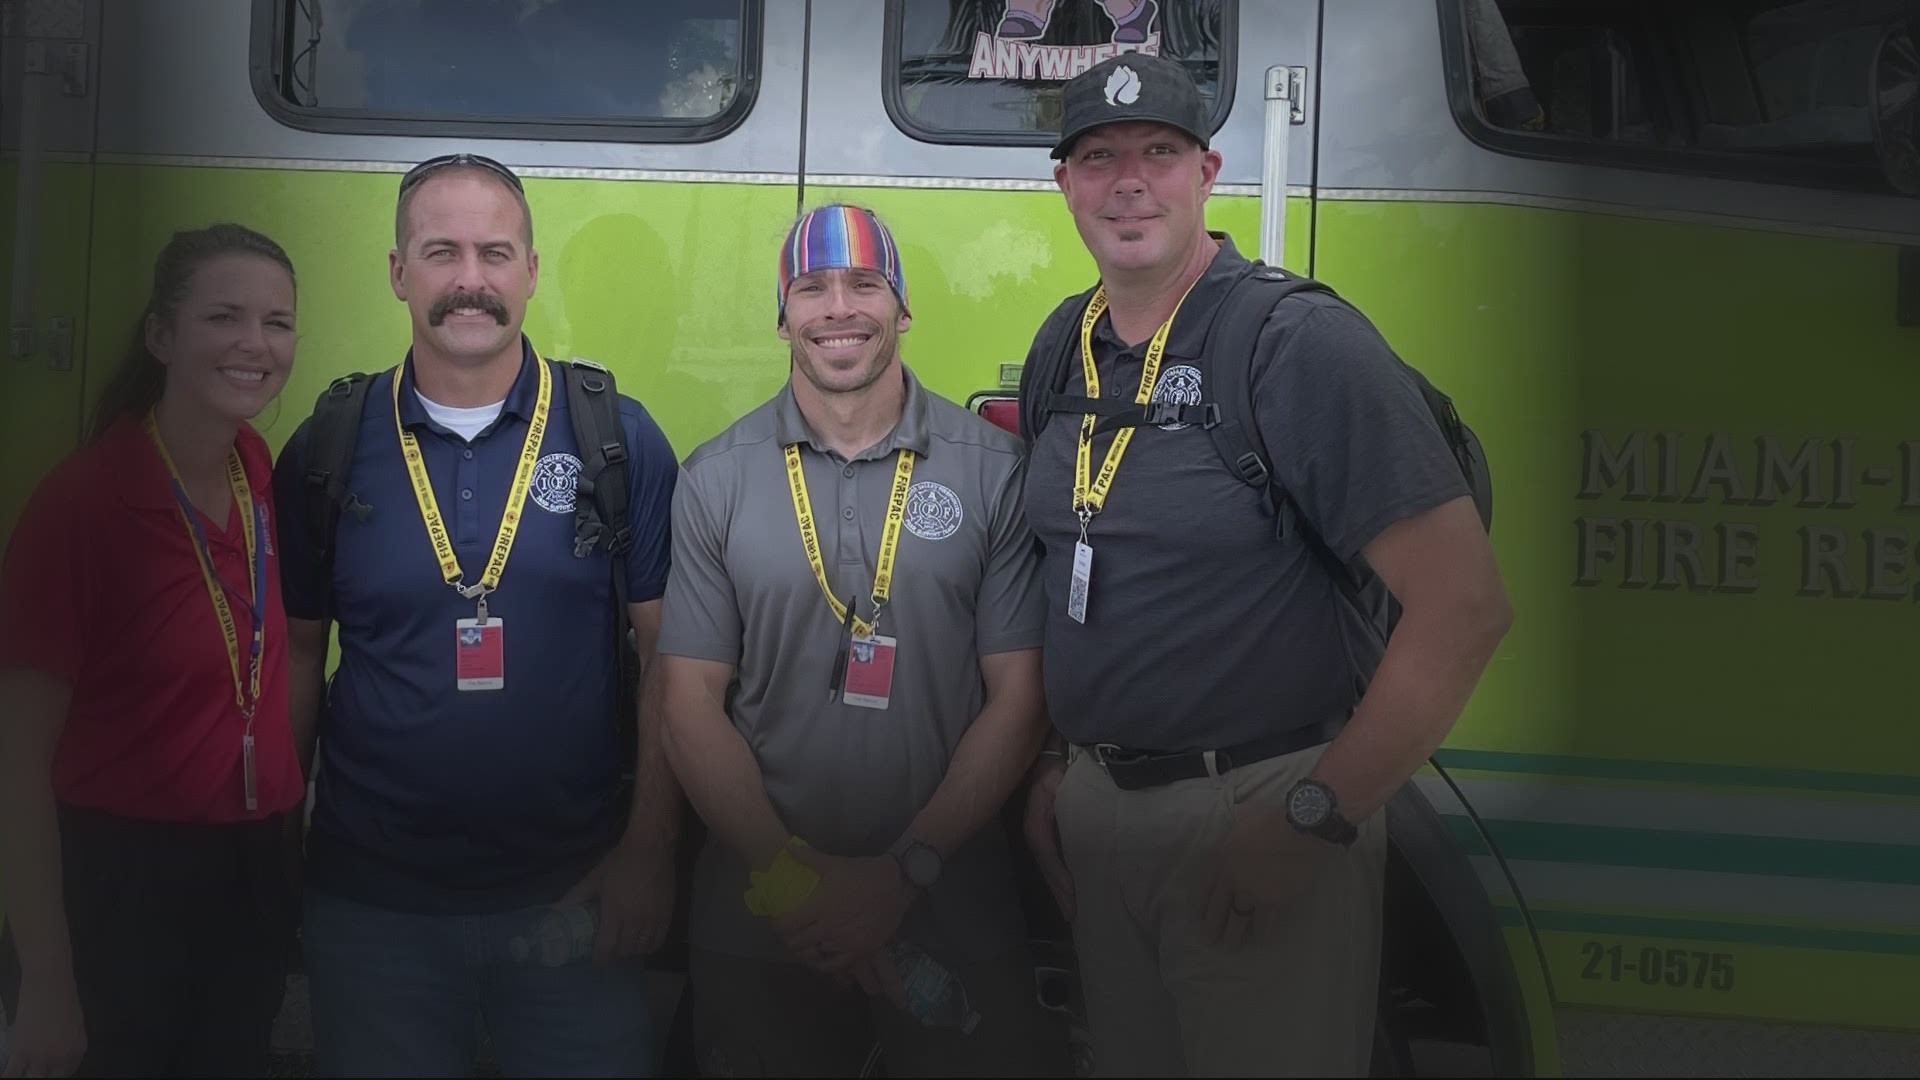 Tualatin Valley Fire & Rescue's Peer Support Team was in the Miami area from July 1-6.